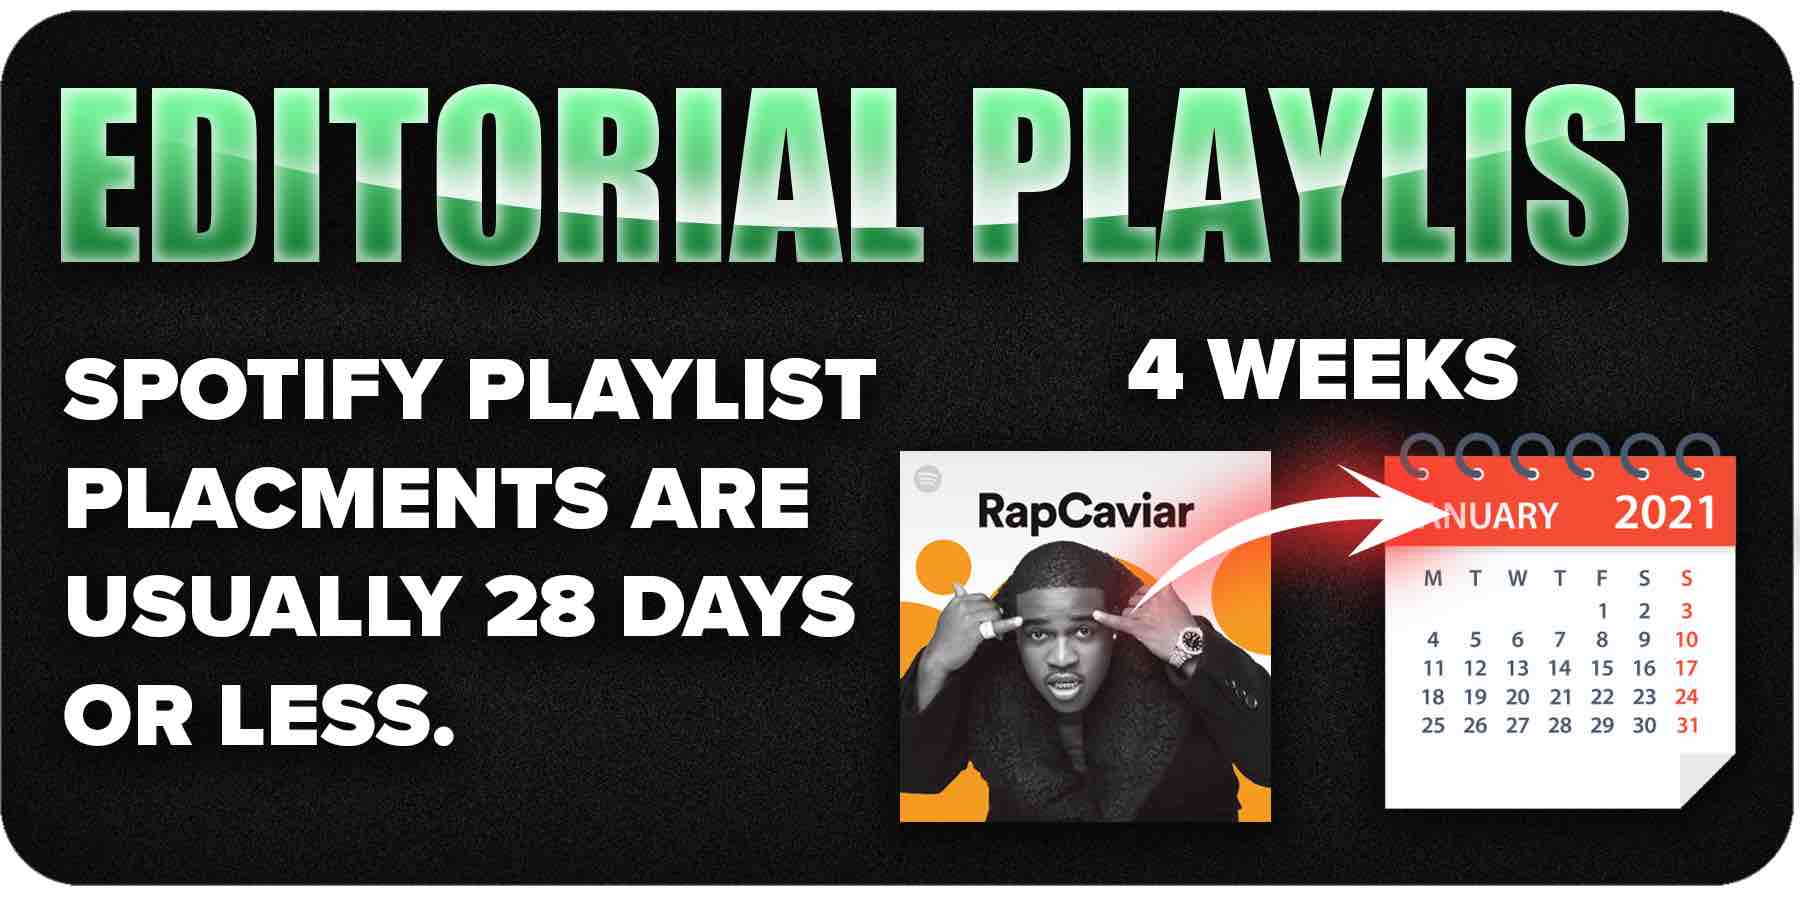 How long are Spotify editorial playlist placements